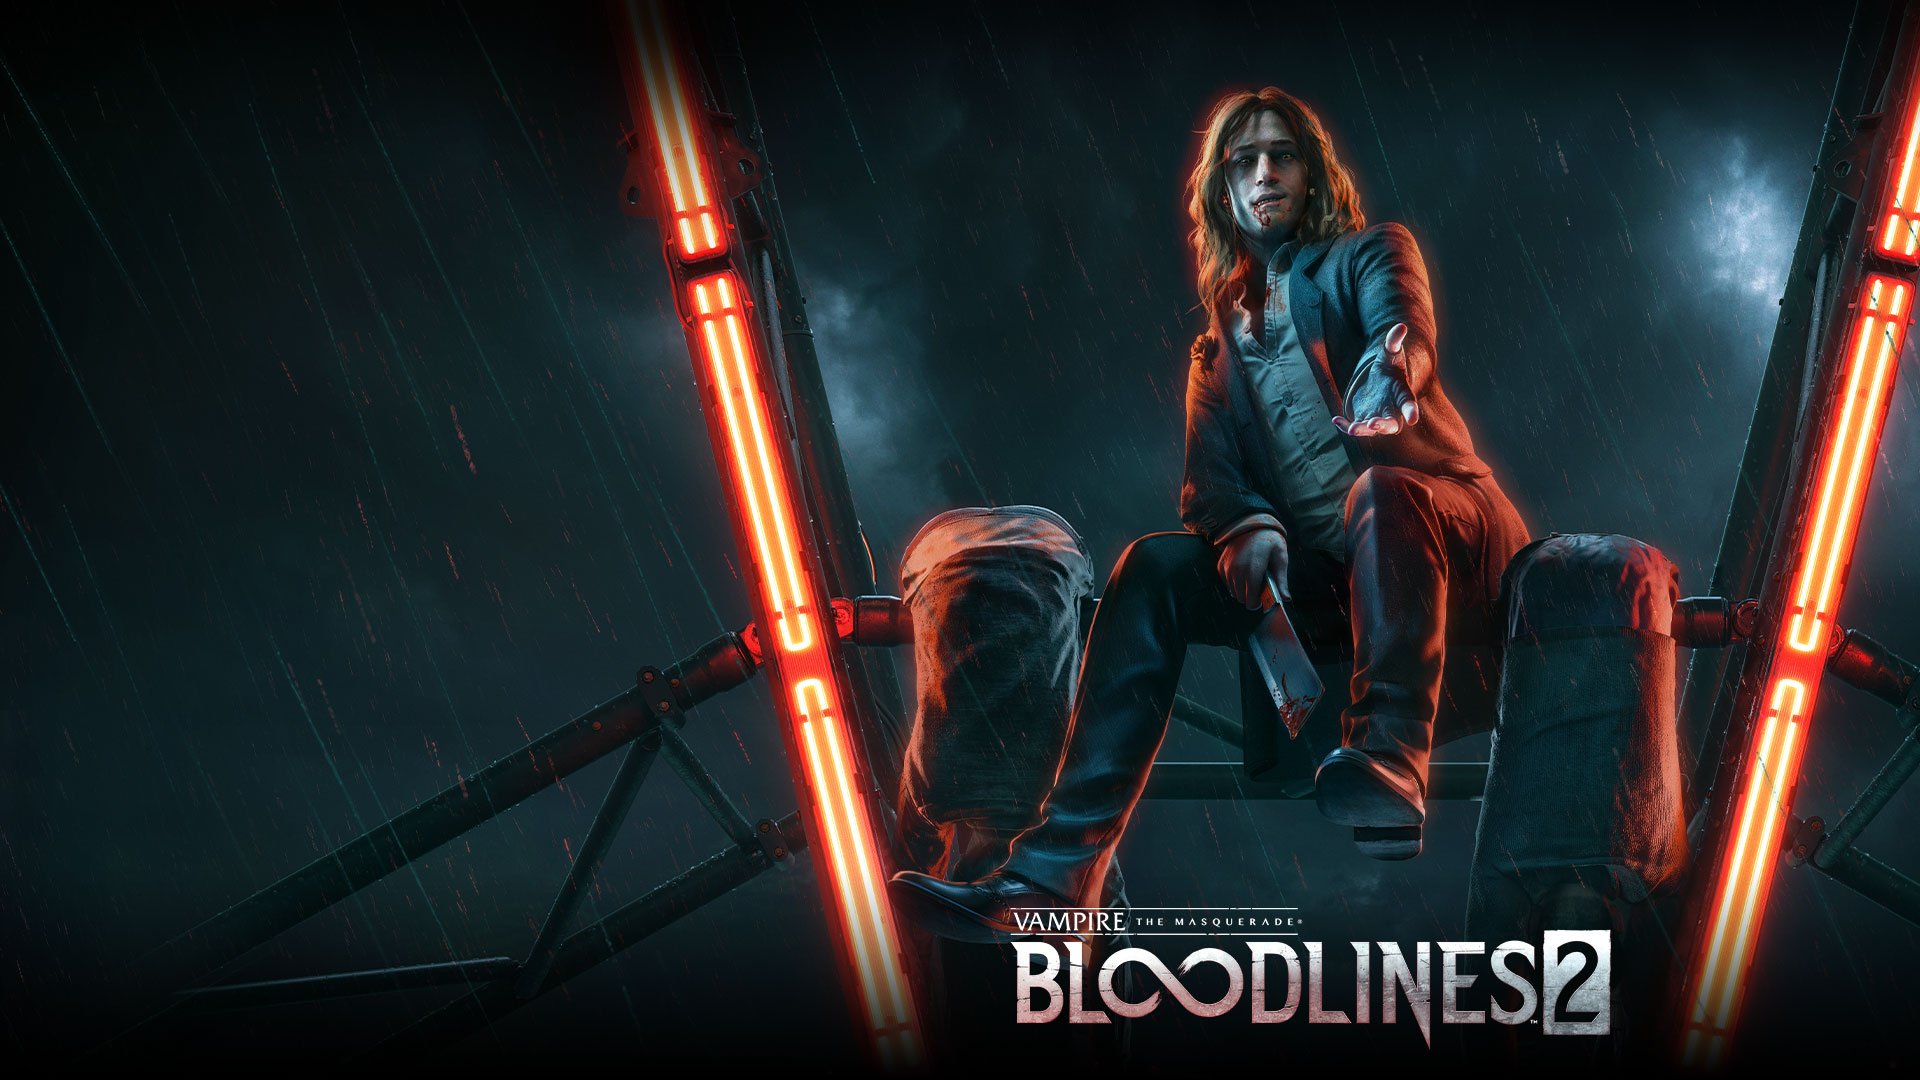 Vampire the Masquerade: Bloodlines 2 was almost canceled after a